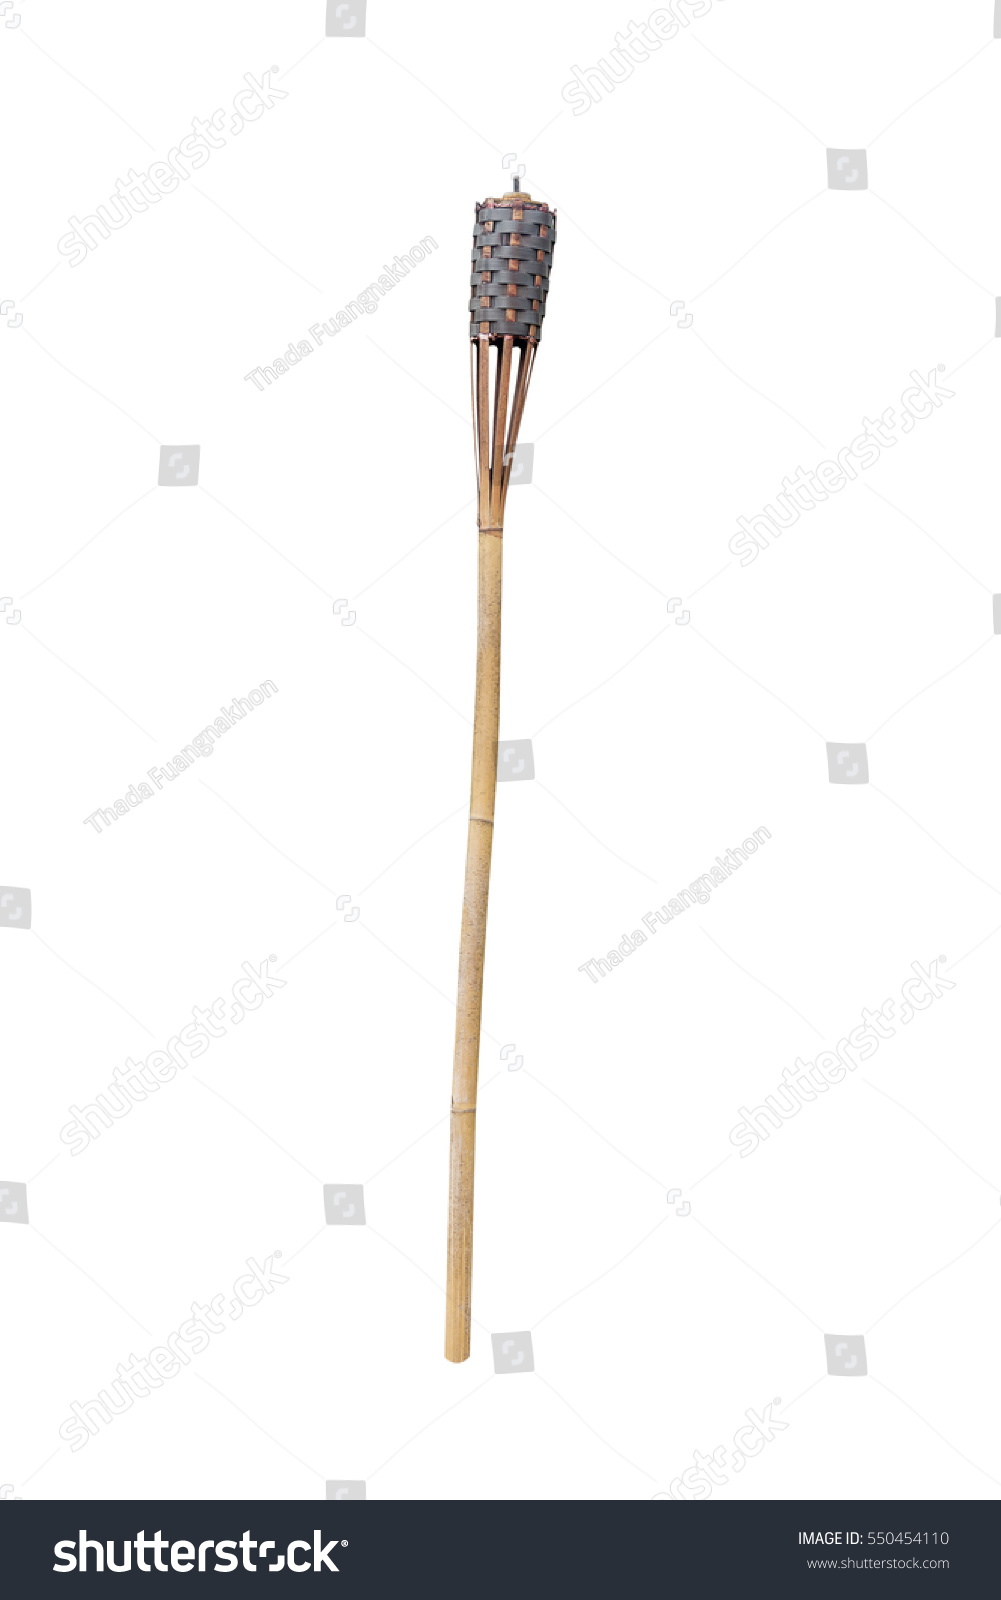 Torch lamp Made of bamboo isolated on white background with cliping path. #550454110